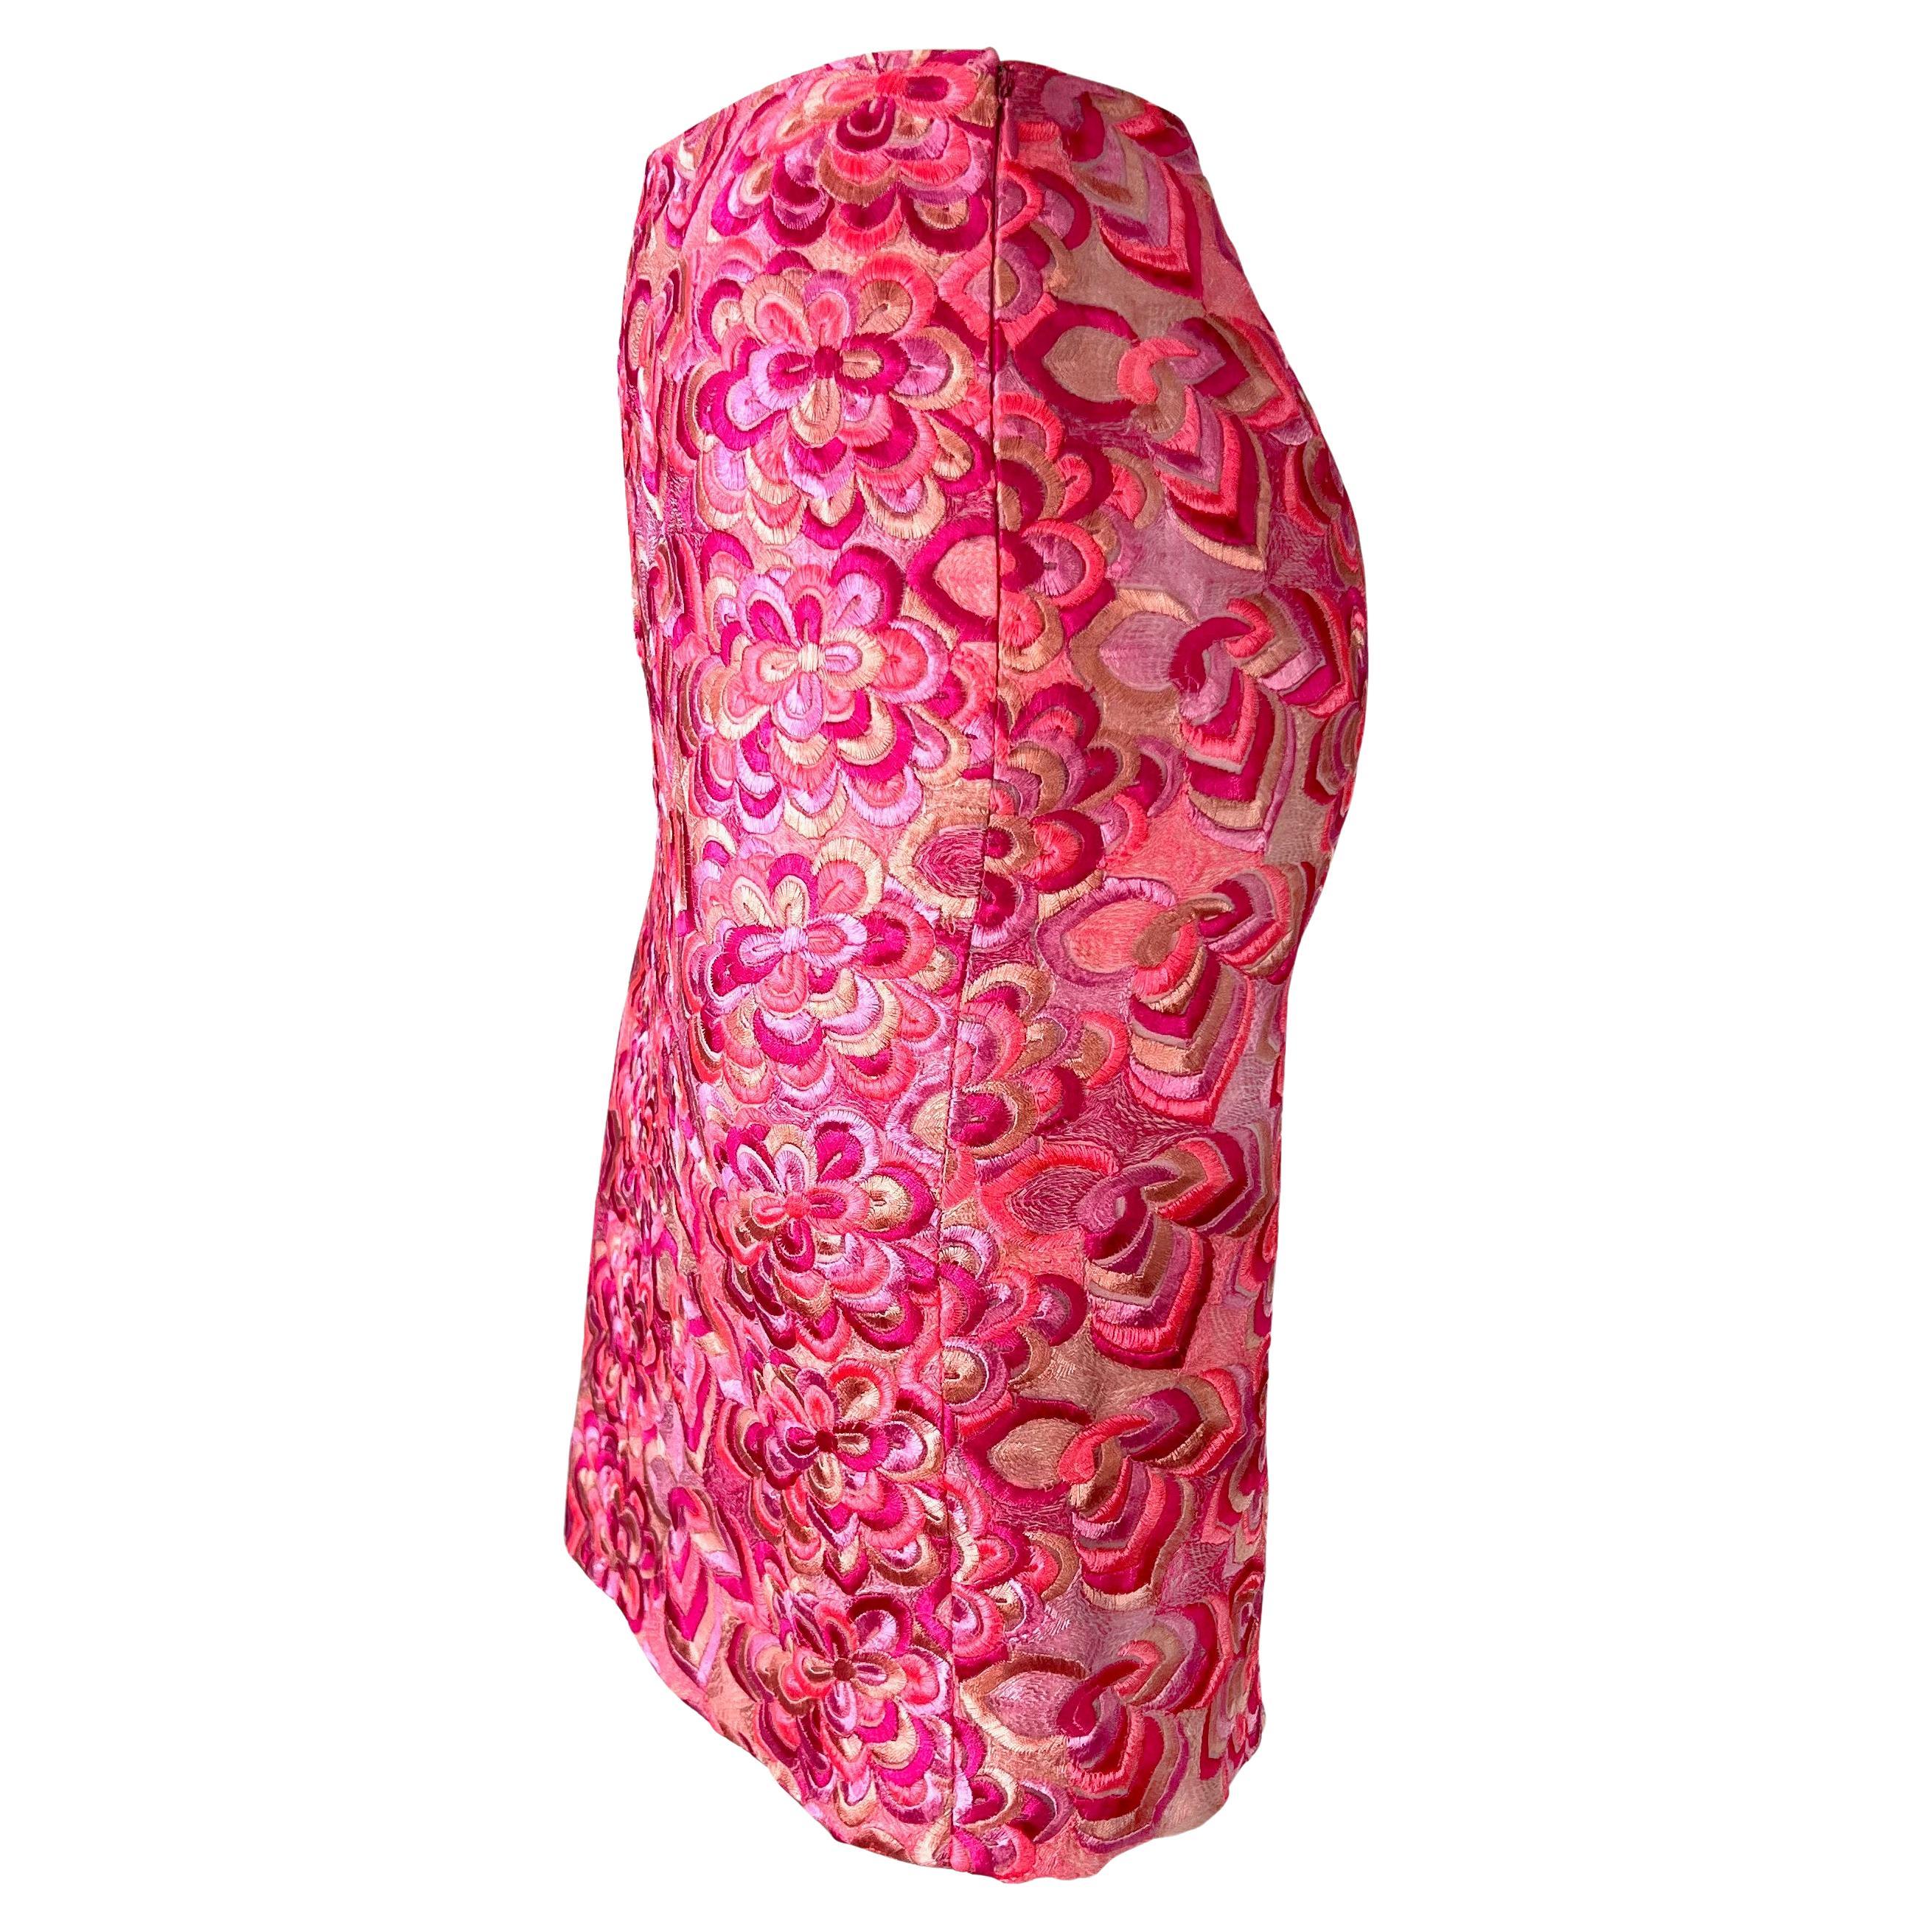 S/S 2000 Gianni Versace by Donatella Neon Pink Floral Embroidered Skirt In Good Condition For Sale In West Hollywood, CA